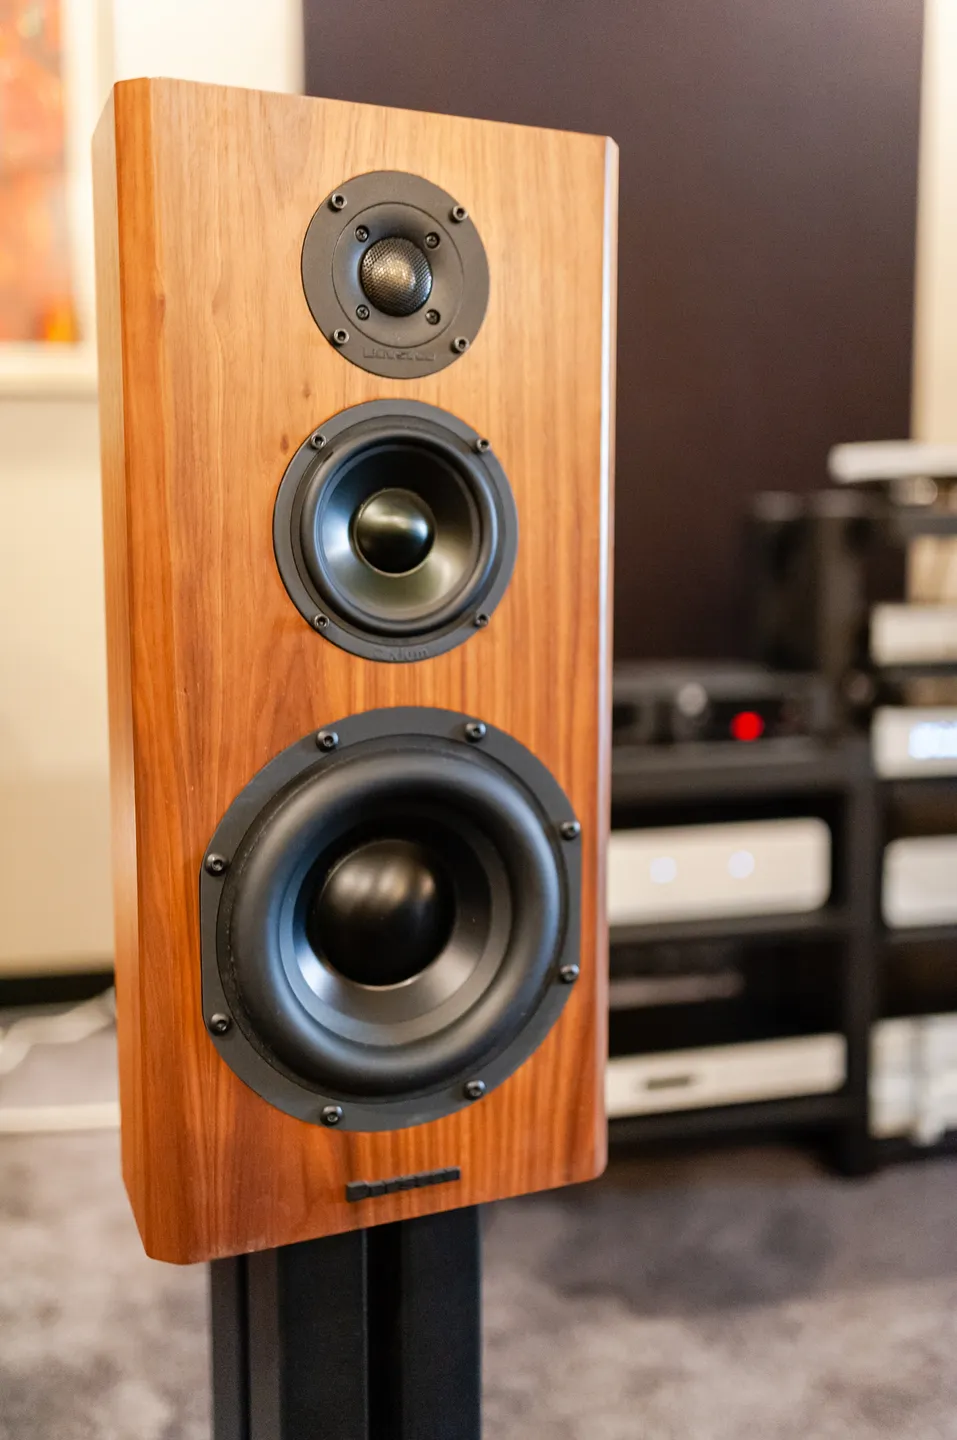 A close up of the front speakers on a speaker system.